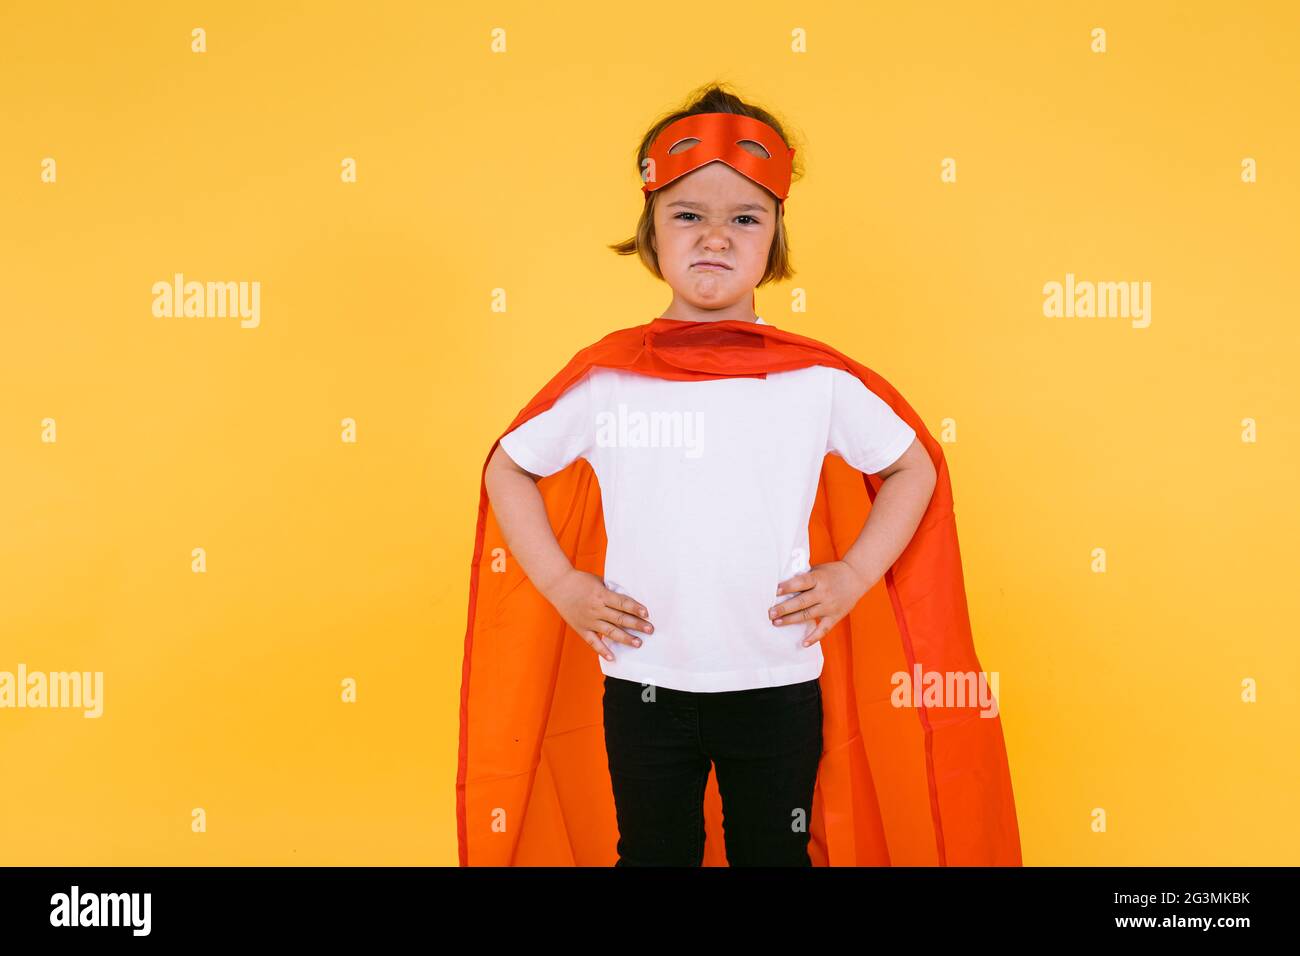 Little blonde girl dressed as a superheroine superhero with a cape and red mask, angry, with her arms akimbo serious, on yellow background Stock Photo